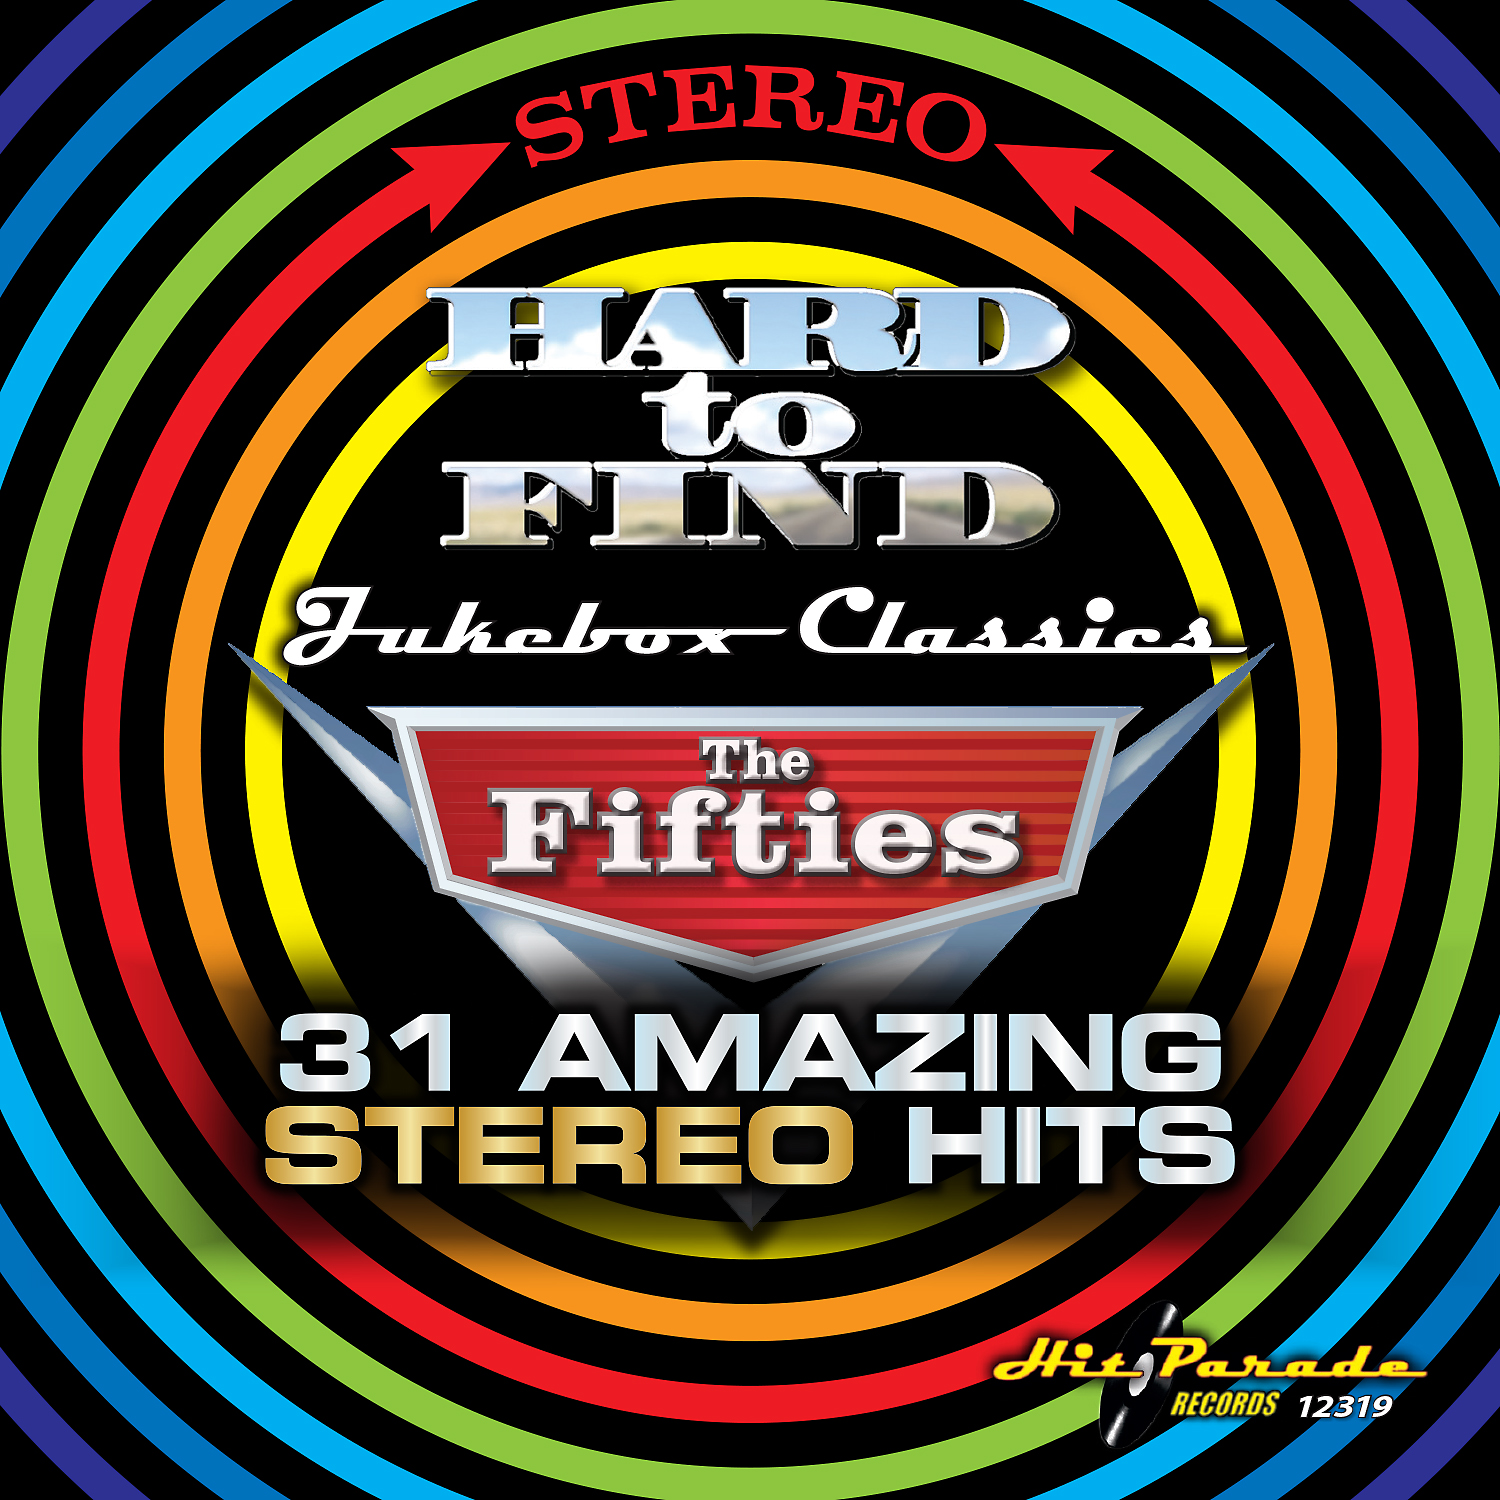 Hard To Find Jukebox Classics - The Fifties: 31 Amazing Stereo Hits